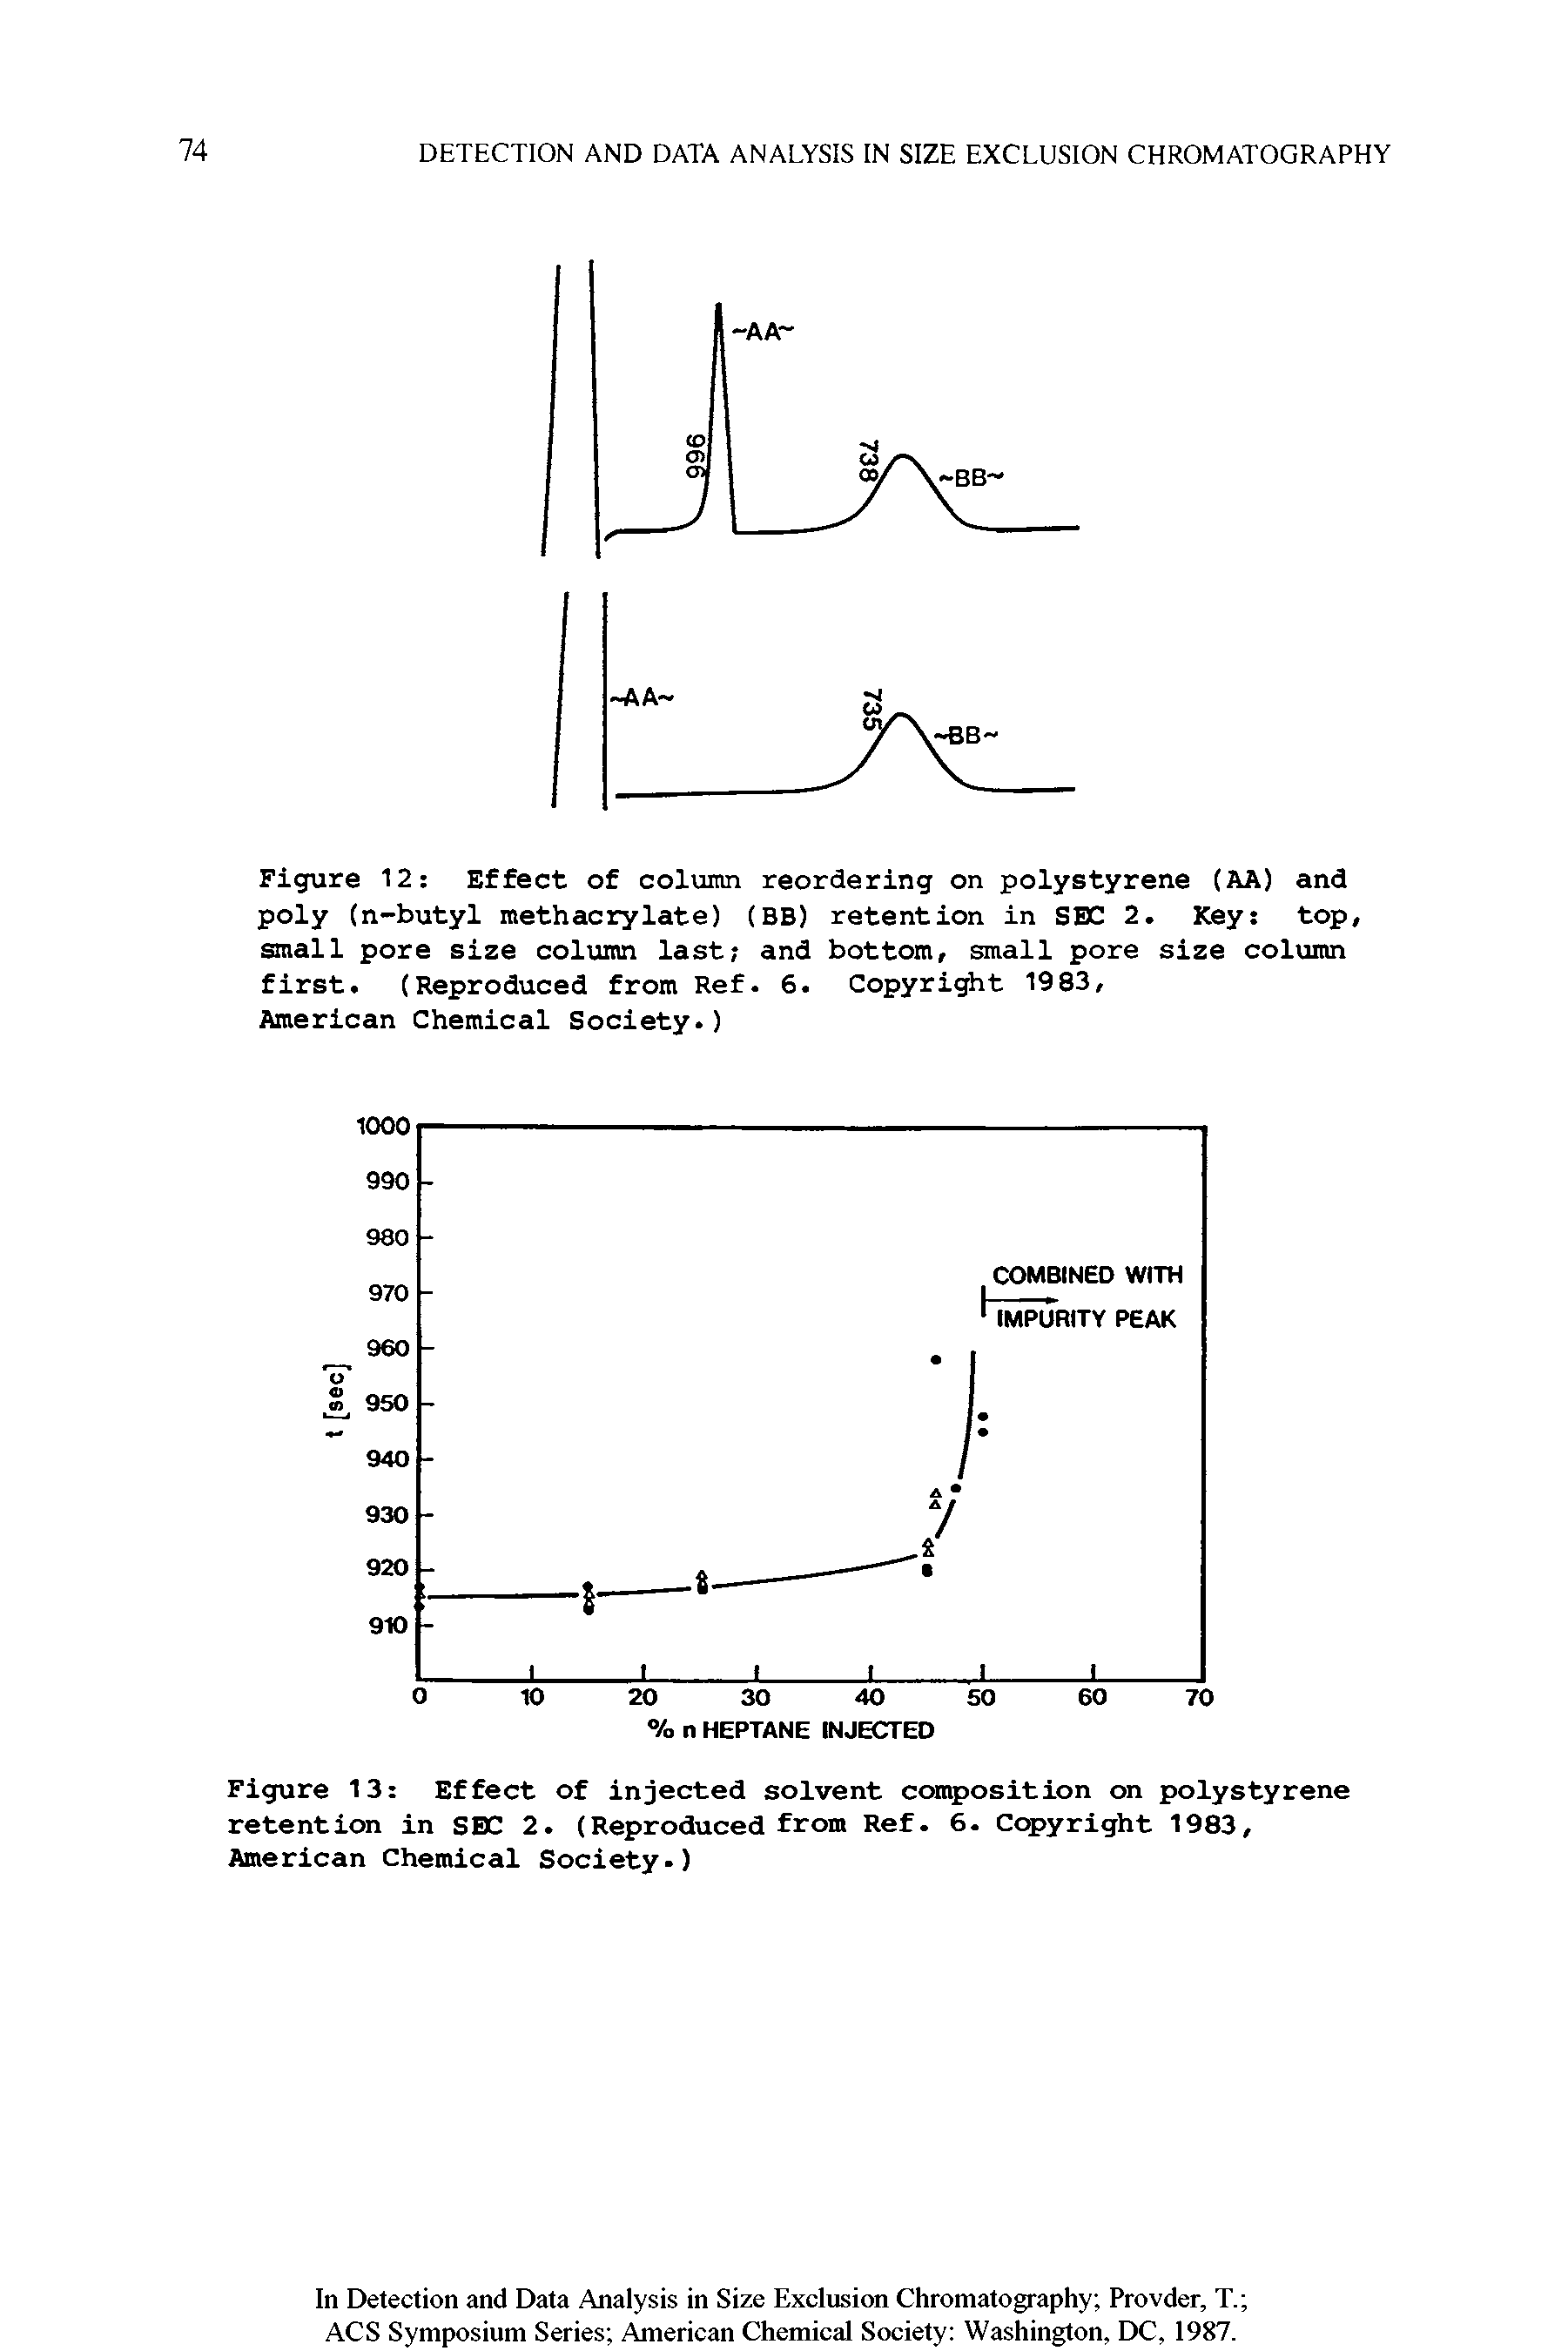 Figure 13 Effect of injected solvent composition on polystyrene retention in SBC 2. (Reproduced from Ref. 6. Copyright 1983, American Chemical Society.)...